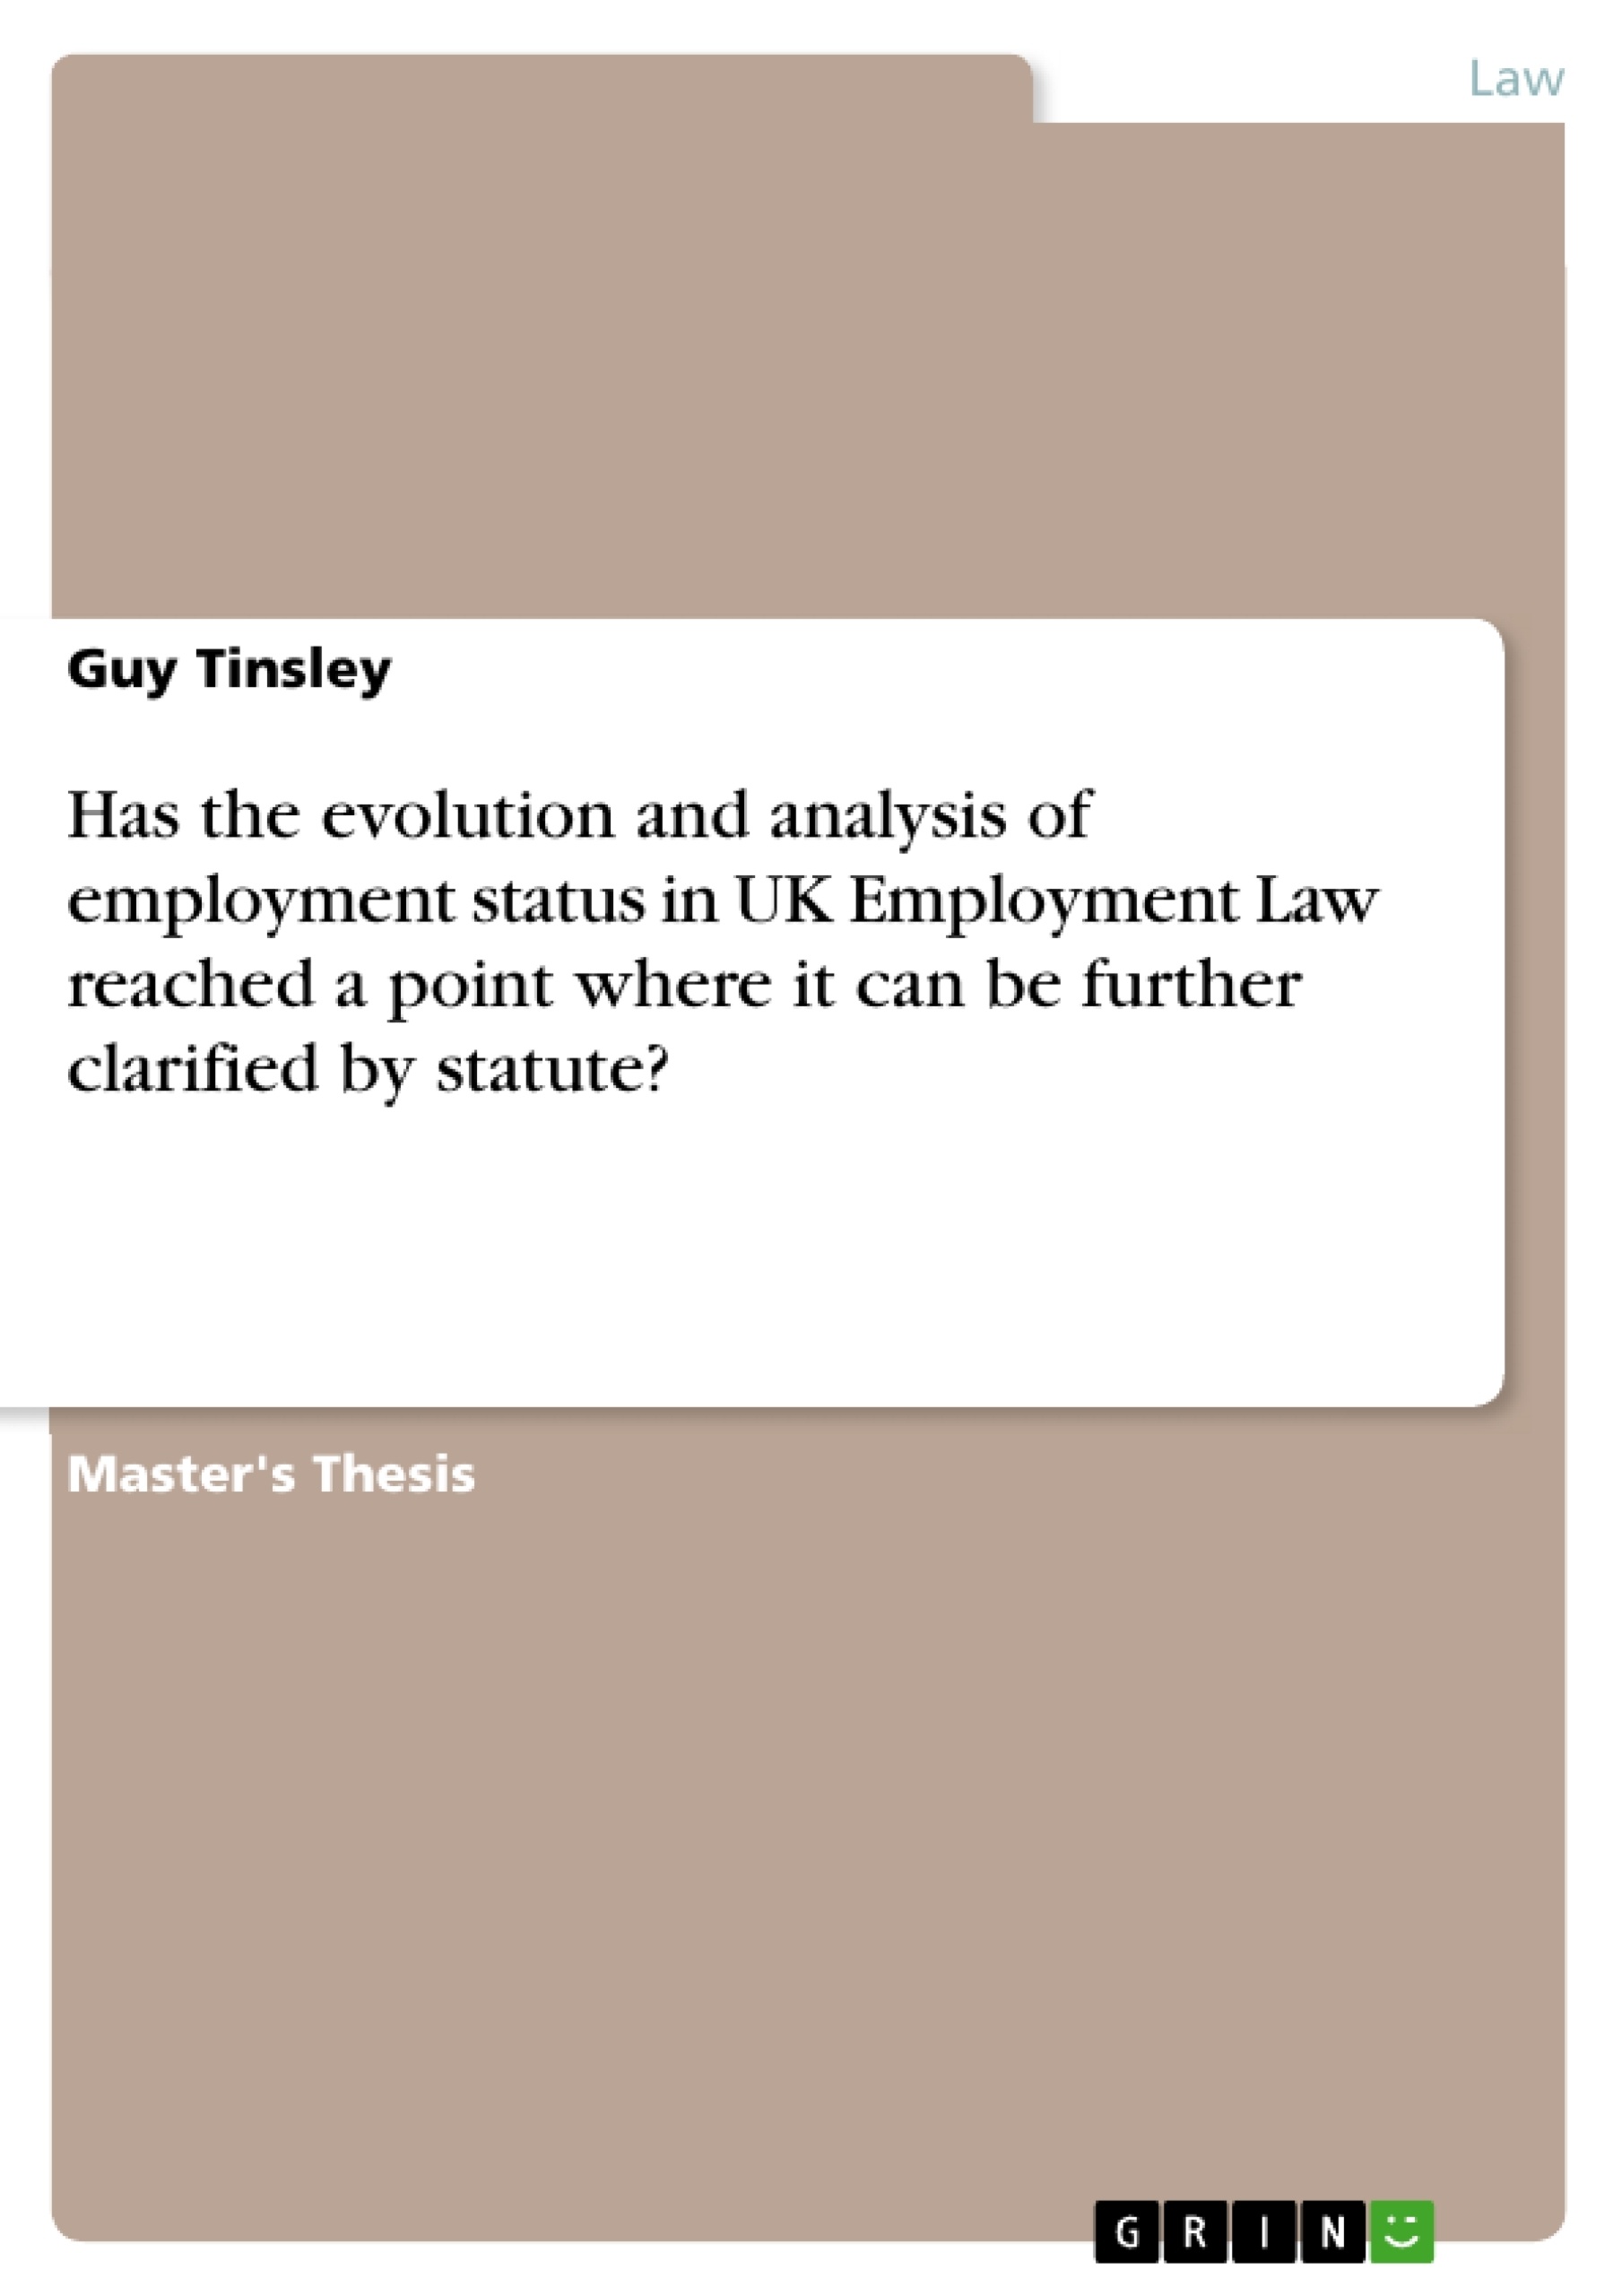 Titre: Has the evolution and analysis of employment status in UK Employment Law reached a point where it can be further clarified by statute?